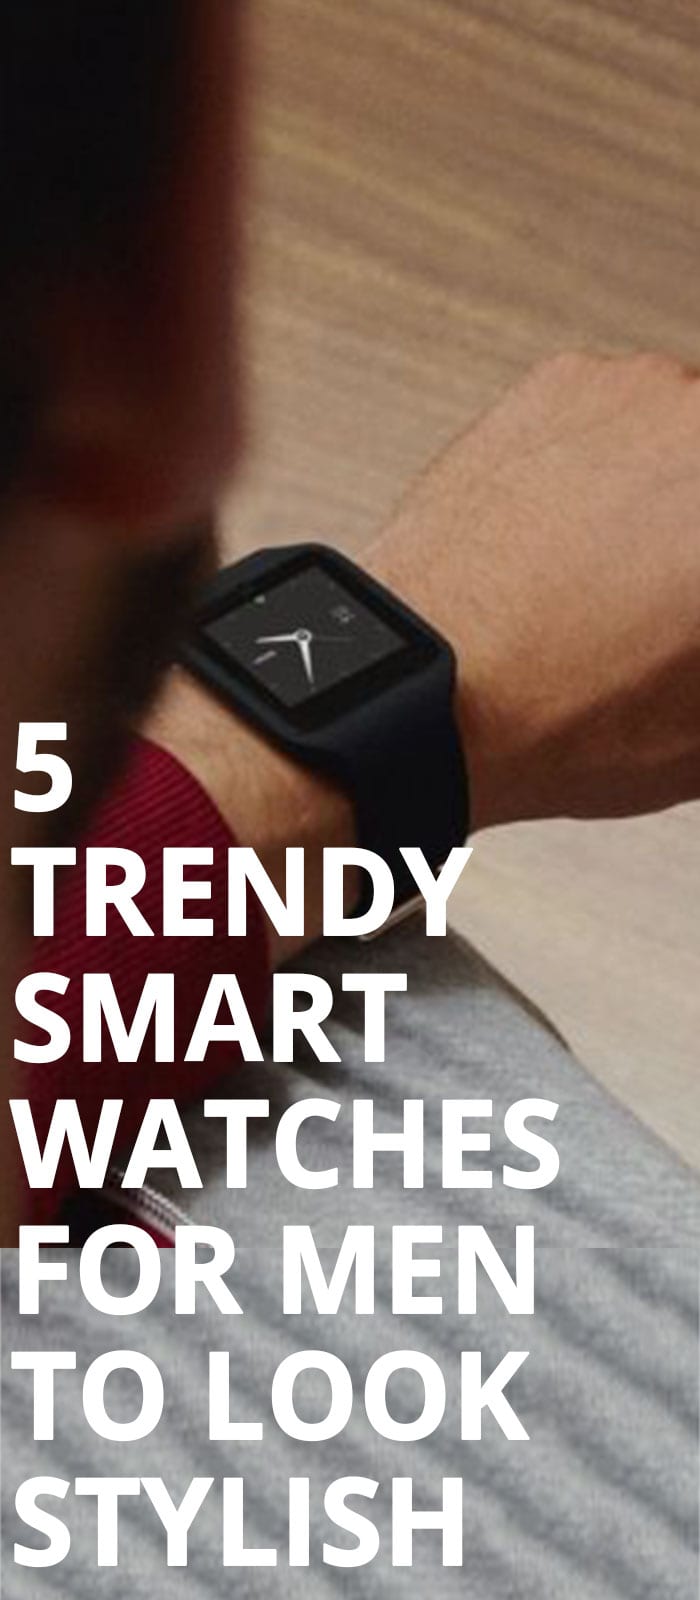 5 Trendy Smart Watches For Men To Look Stylish!